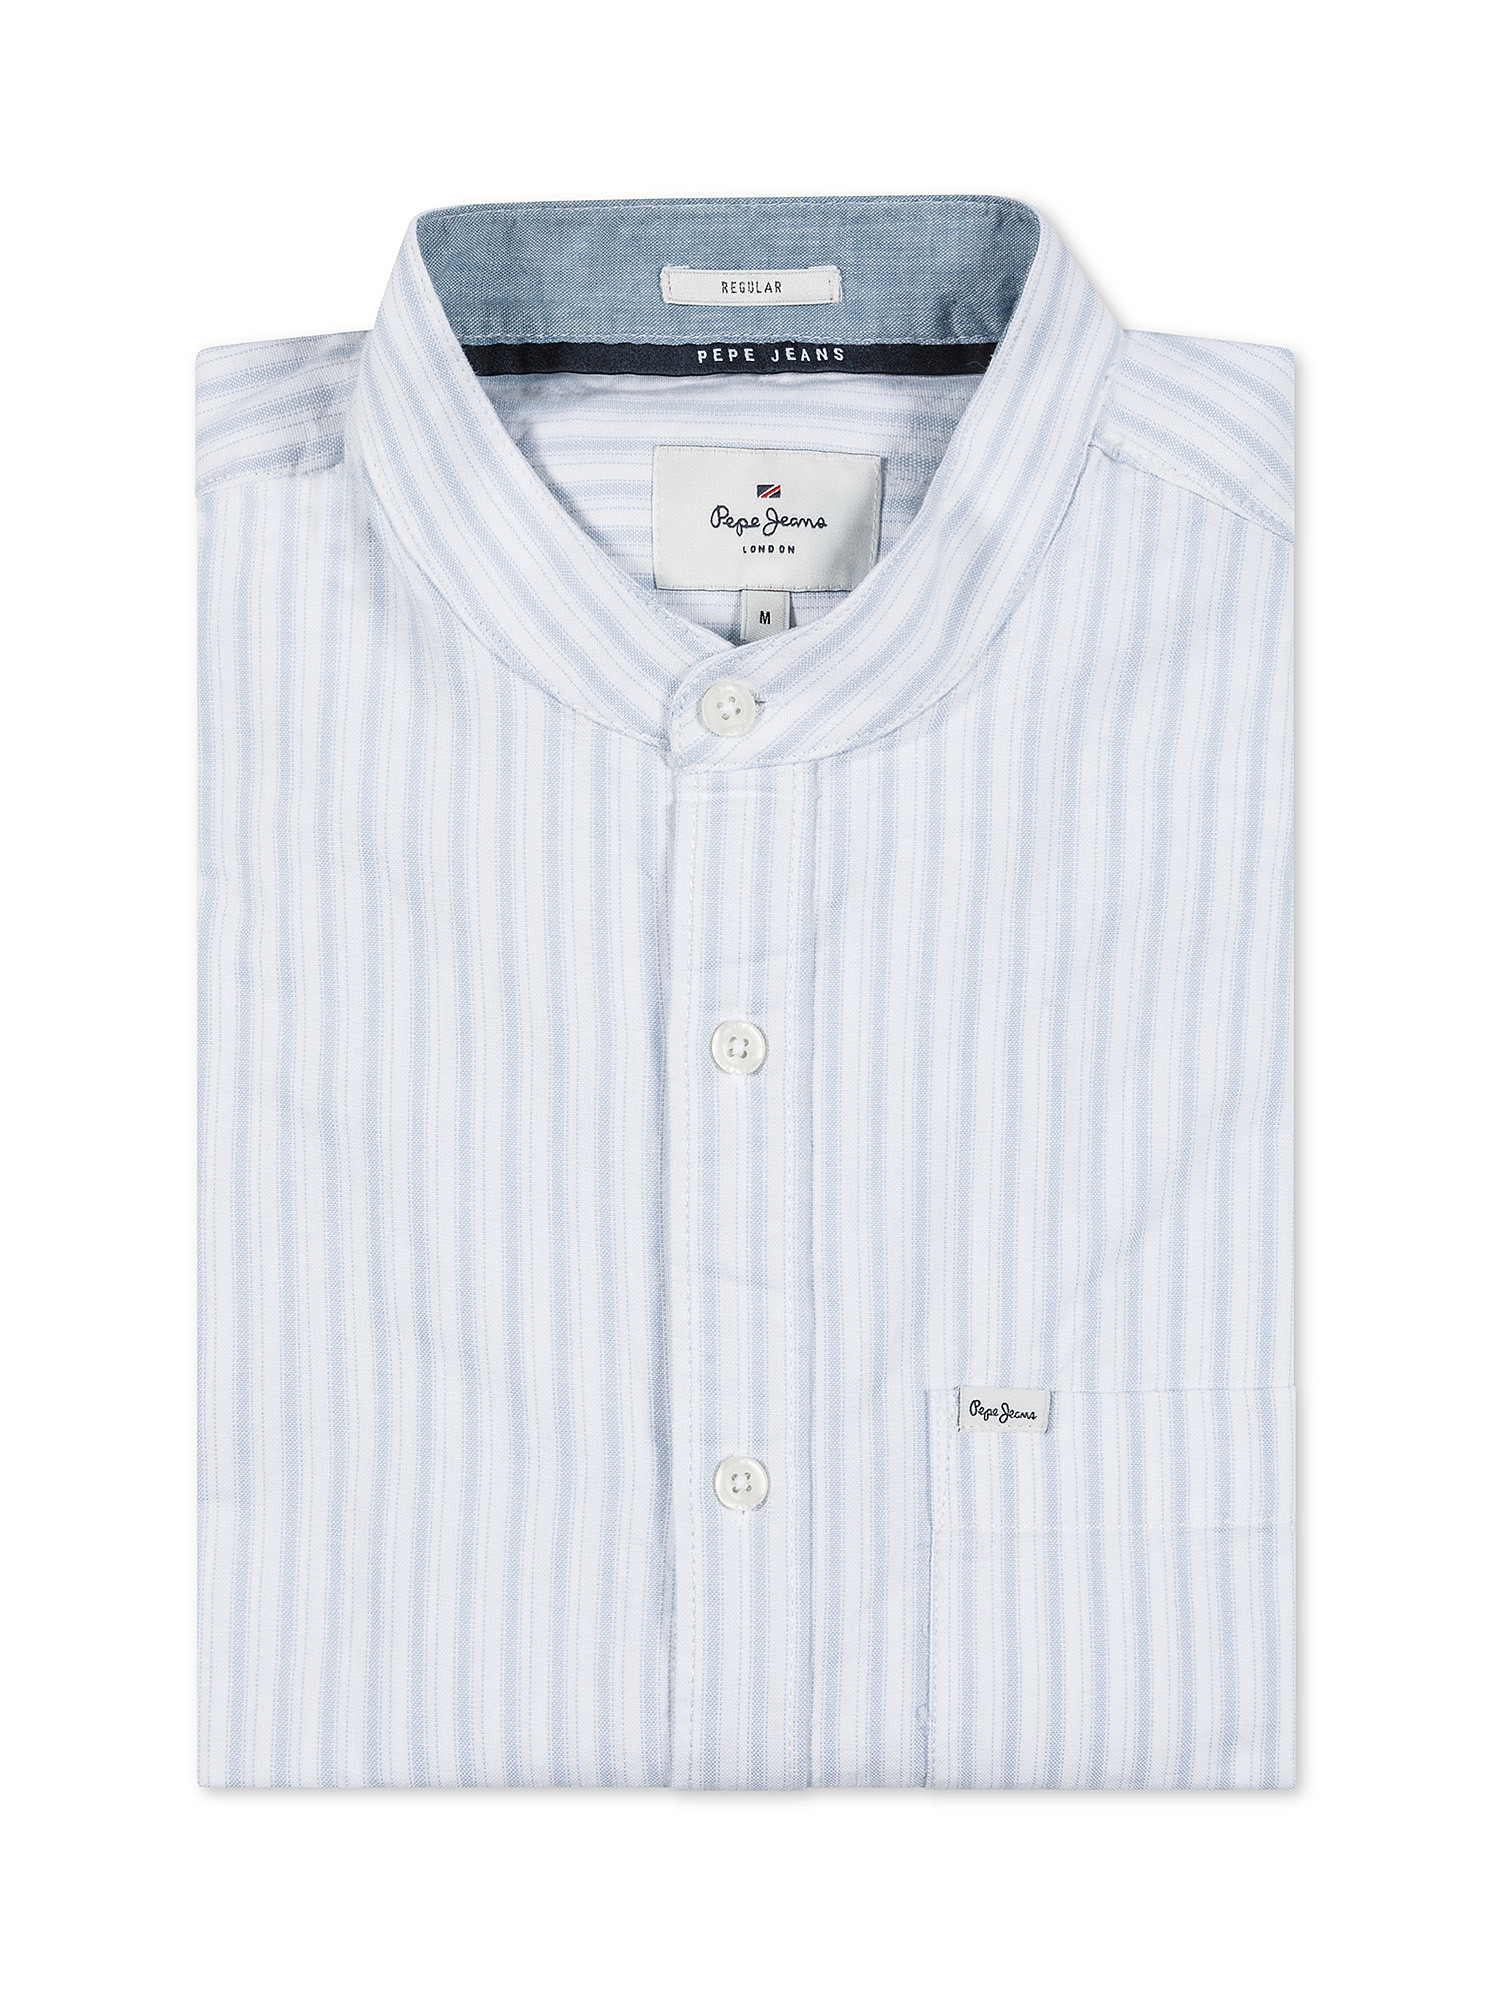 Pepe Jeans - Regular fit striped shirt, White, large image number 0